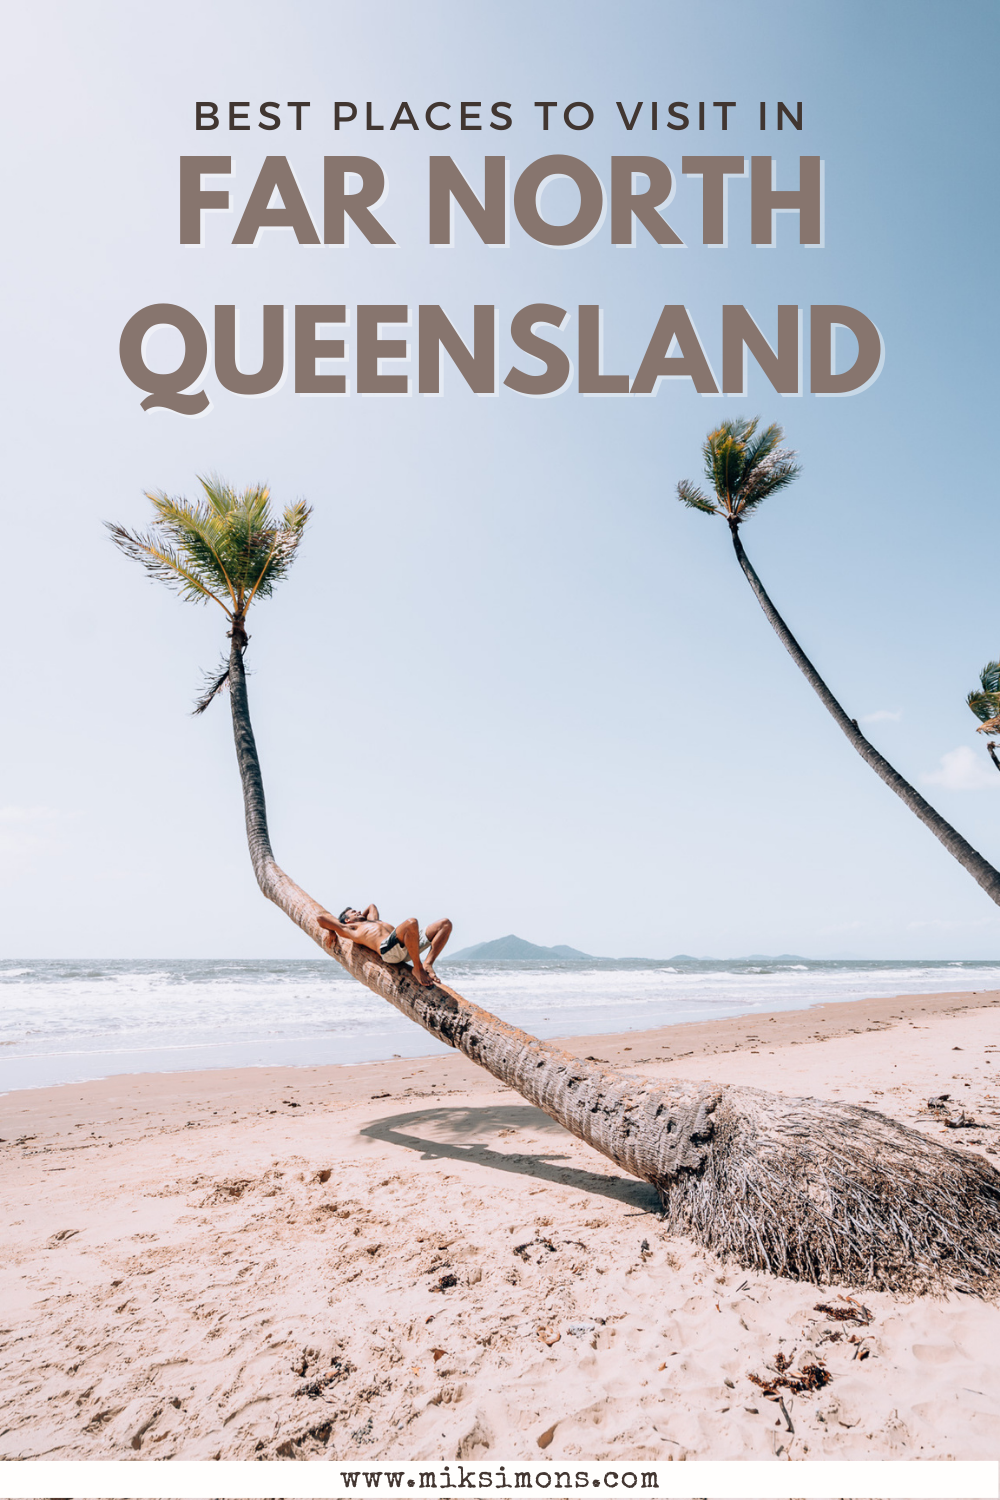 TROPICAL NORTH QUEENSLAND - 17 AWESOME PLACES TO VISIT1